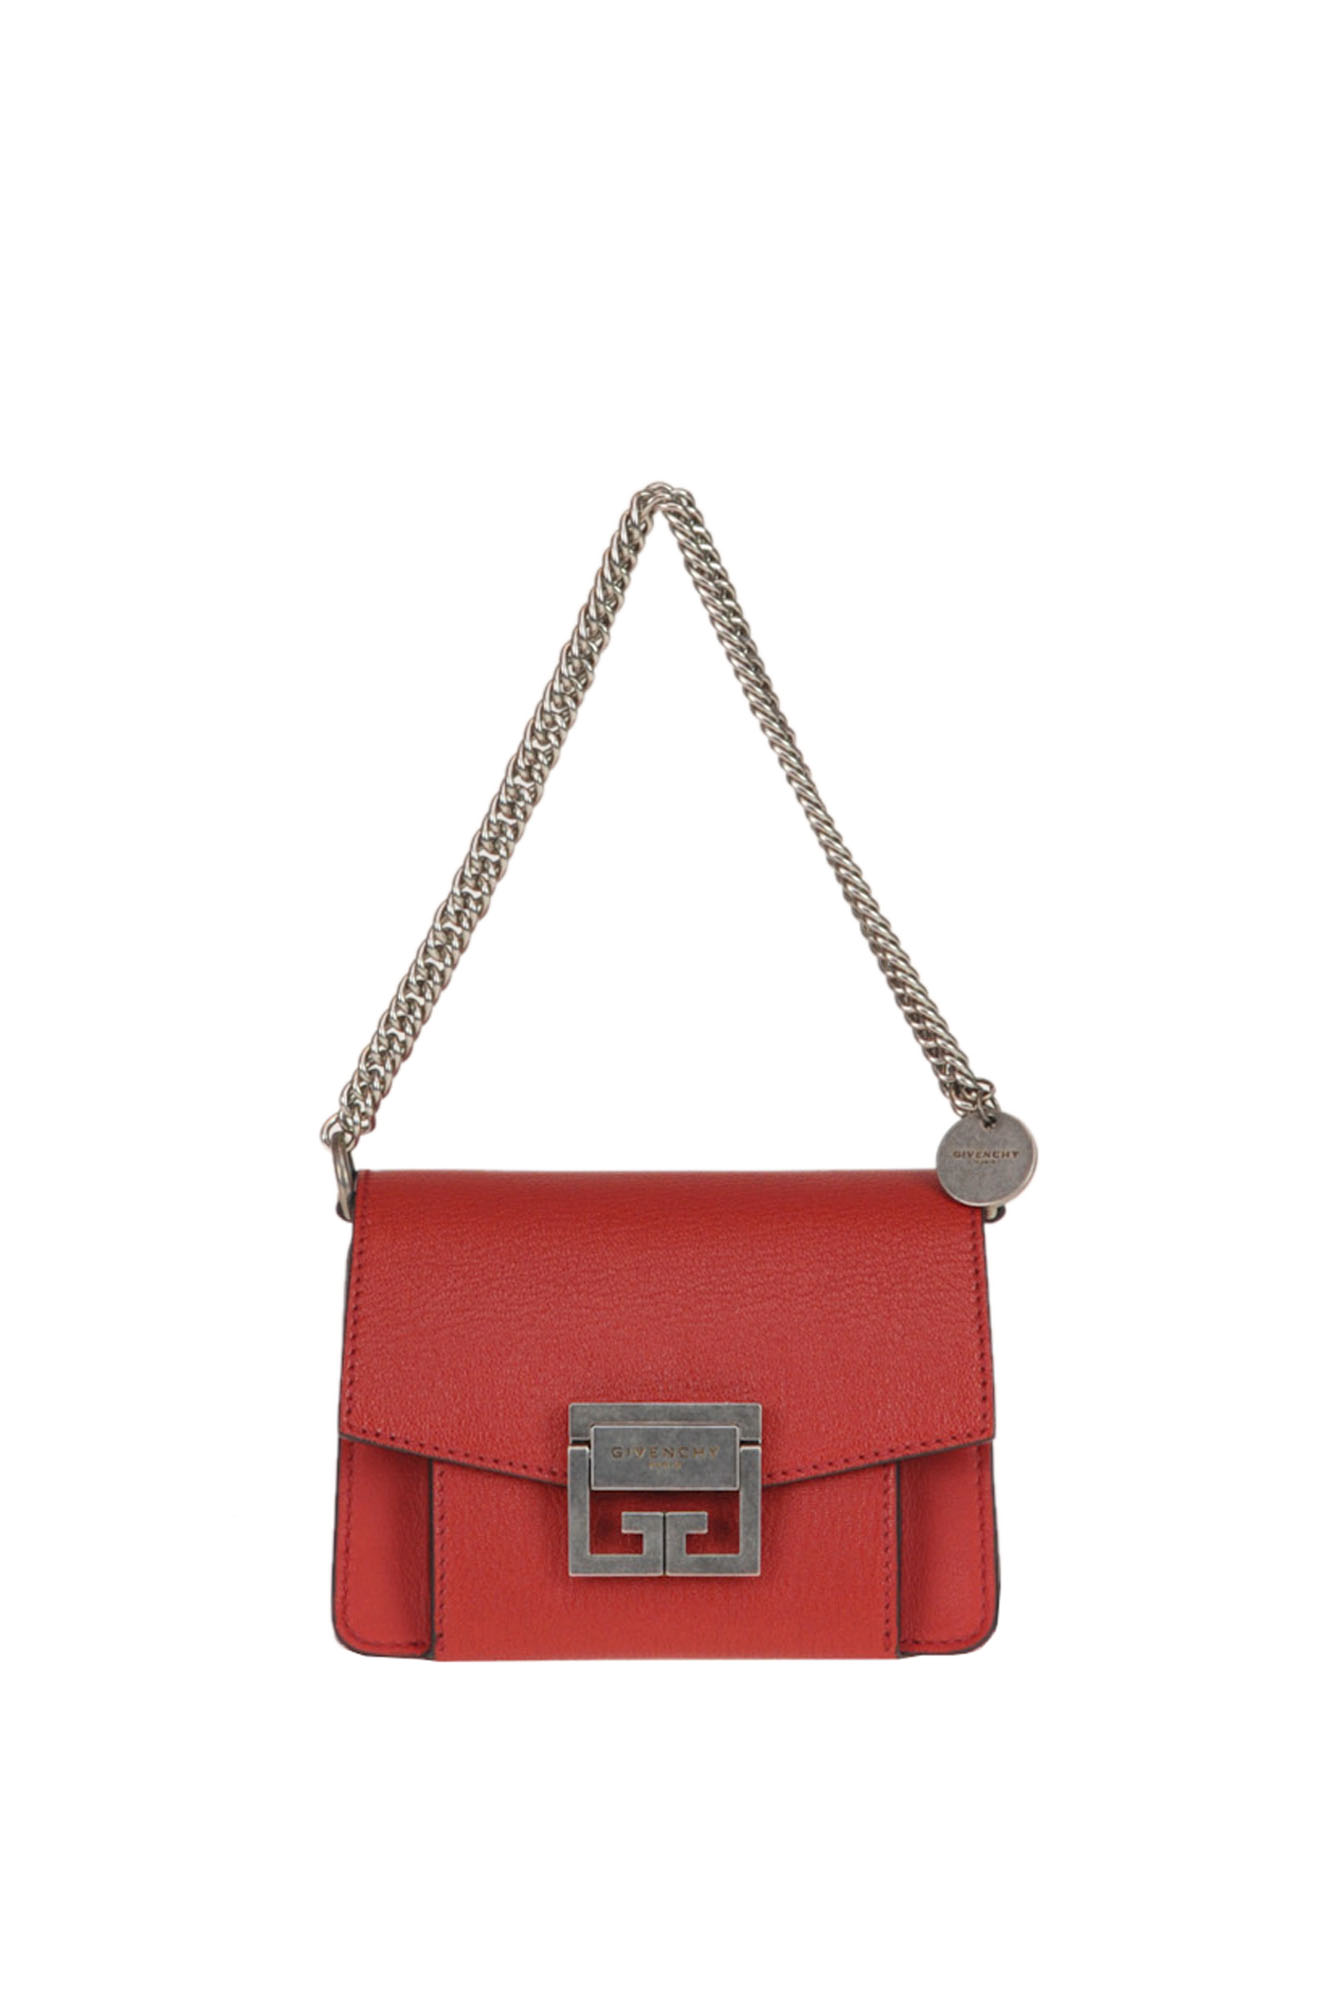 Givenchy Gv3 Mini Leather Shoulder Bag In Fire Red